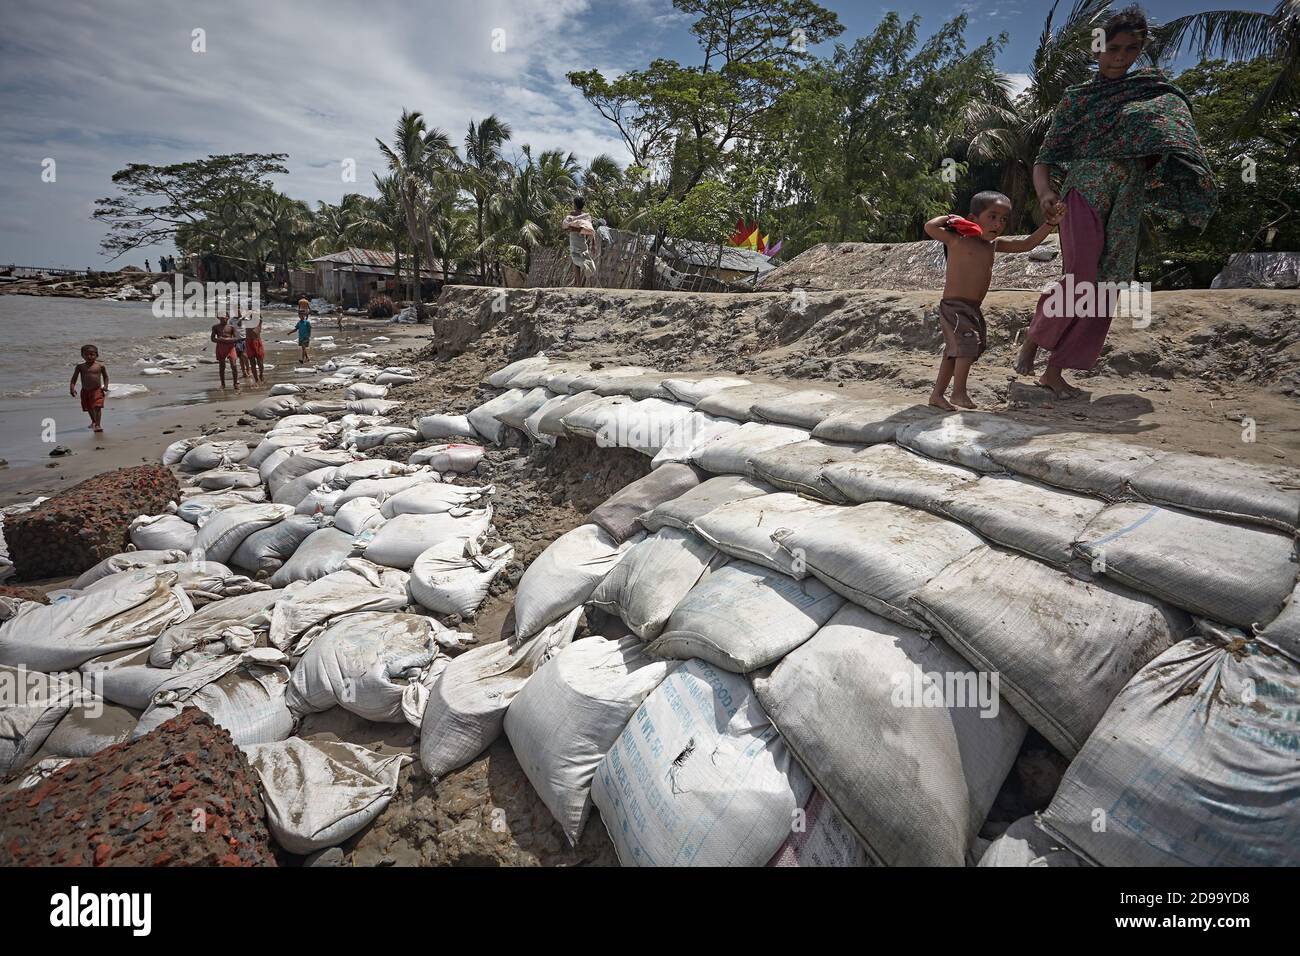 Kutubdia, Bangladesh, July 2009 - Sandbags on the seashore to protect houses from rising sea levels due to climate change. Stock Photo